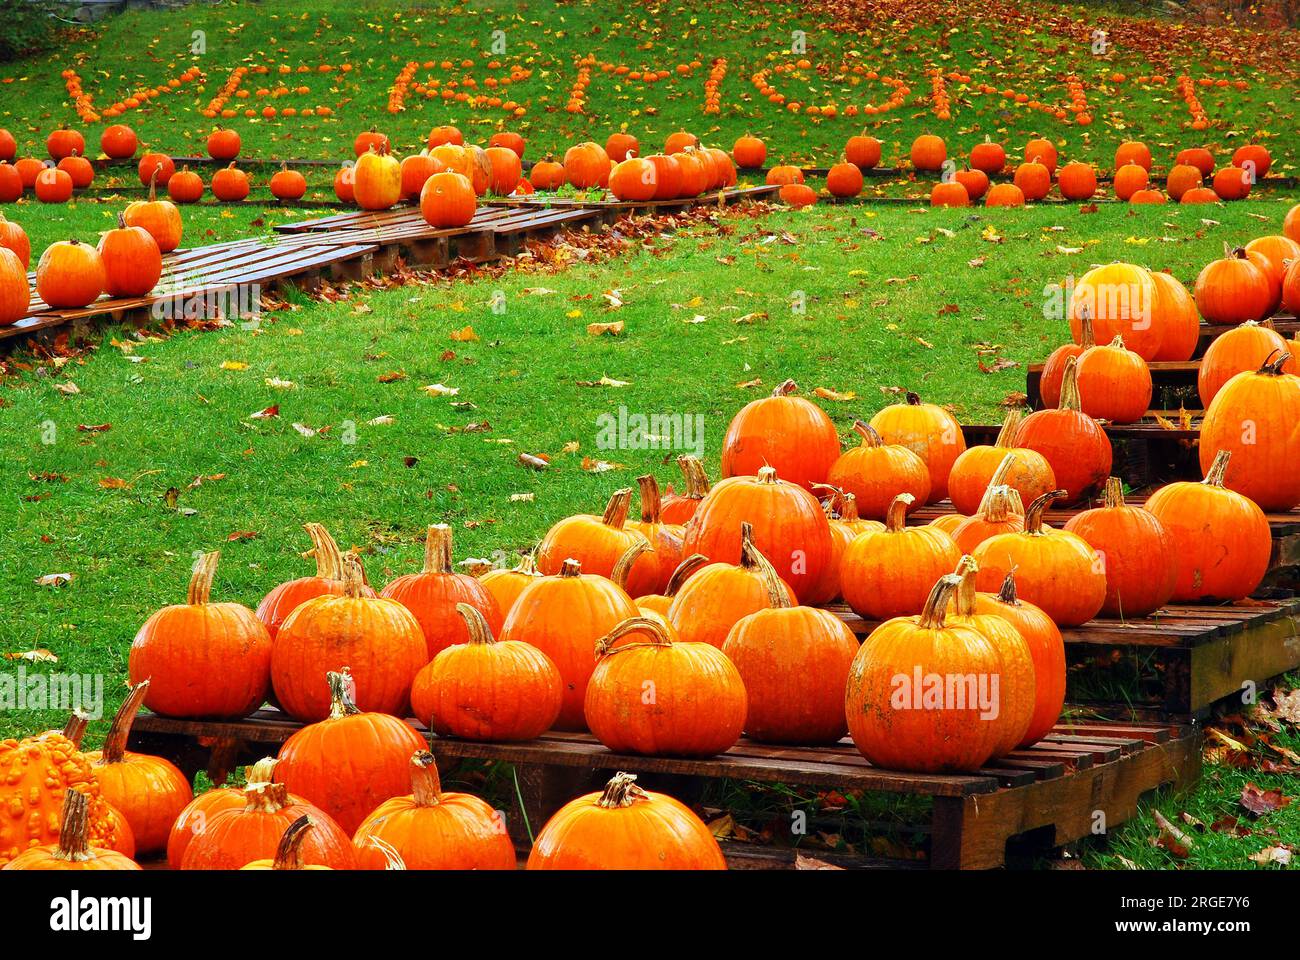 A roadside farm uses their pumpkins in autumn, near Halloween, to spell out Vermont, their New England state name Stock Photo